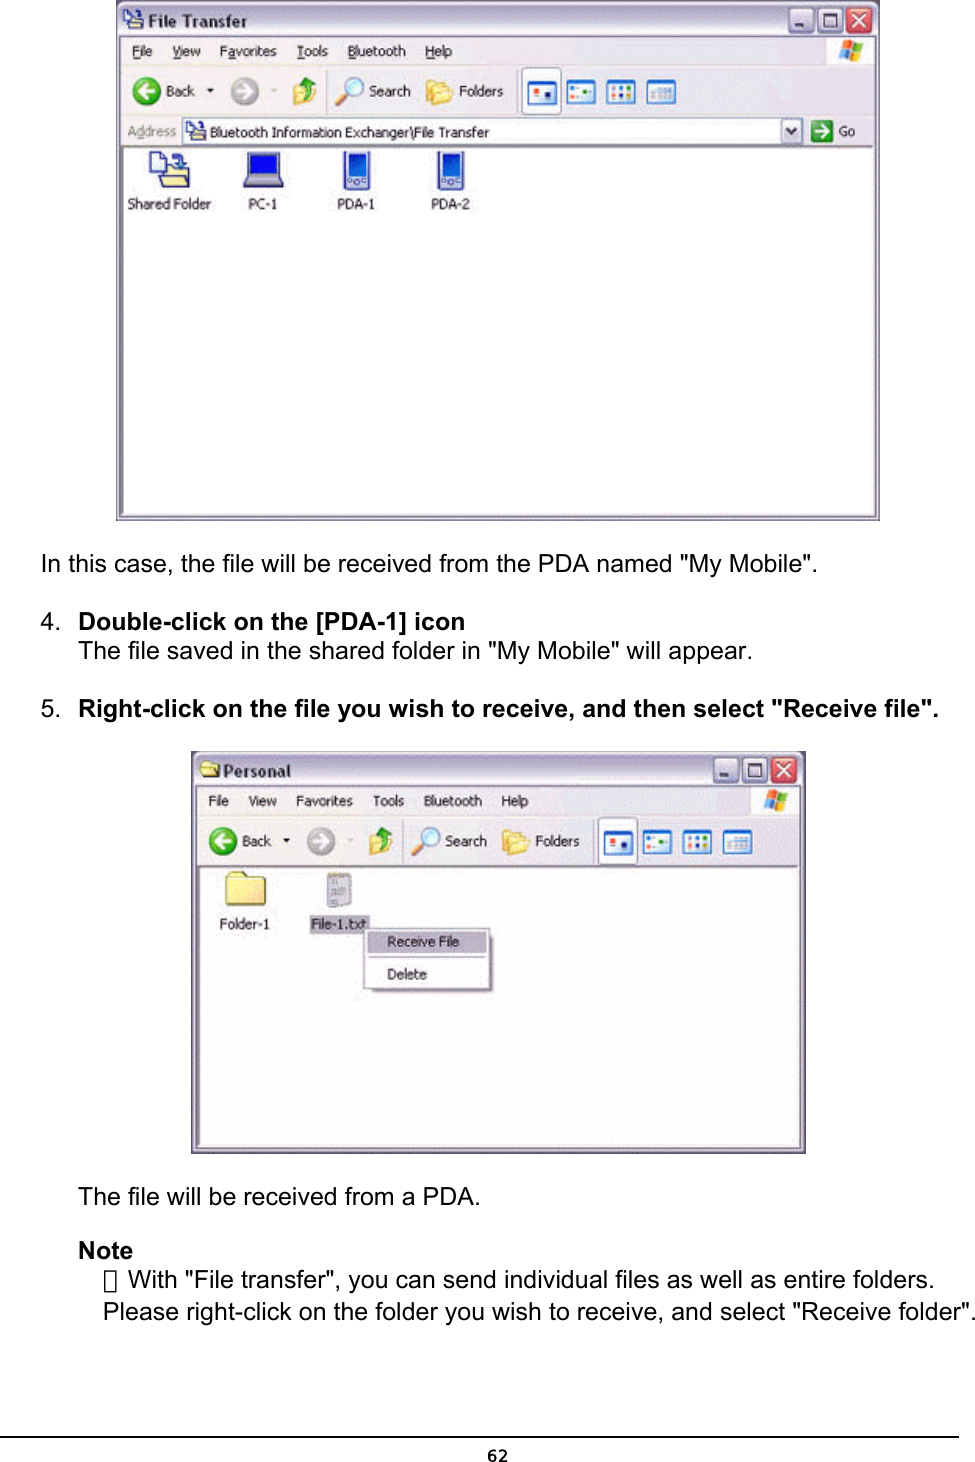   In this case, the file will be received from the PDA named &quot;My Mobile&quot;. 4.  Double-click on the [PDA-1] icon The file saved in the shared folder in &quot;My Mobile&quot; will appear.  5.  Right-click on the file you wish to receive, and then select &quot;Receive file&quot;.  The file will be received from a PDA. Note ．With &quot;File transfer&quot;, you can send individual files as well as entire folders. Please right-click on the folder you wish to receive, and select &quot;Receive folder&quot;.  62